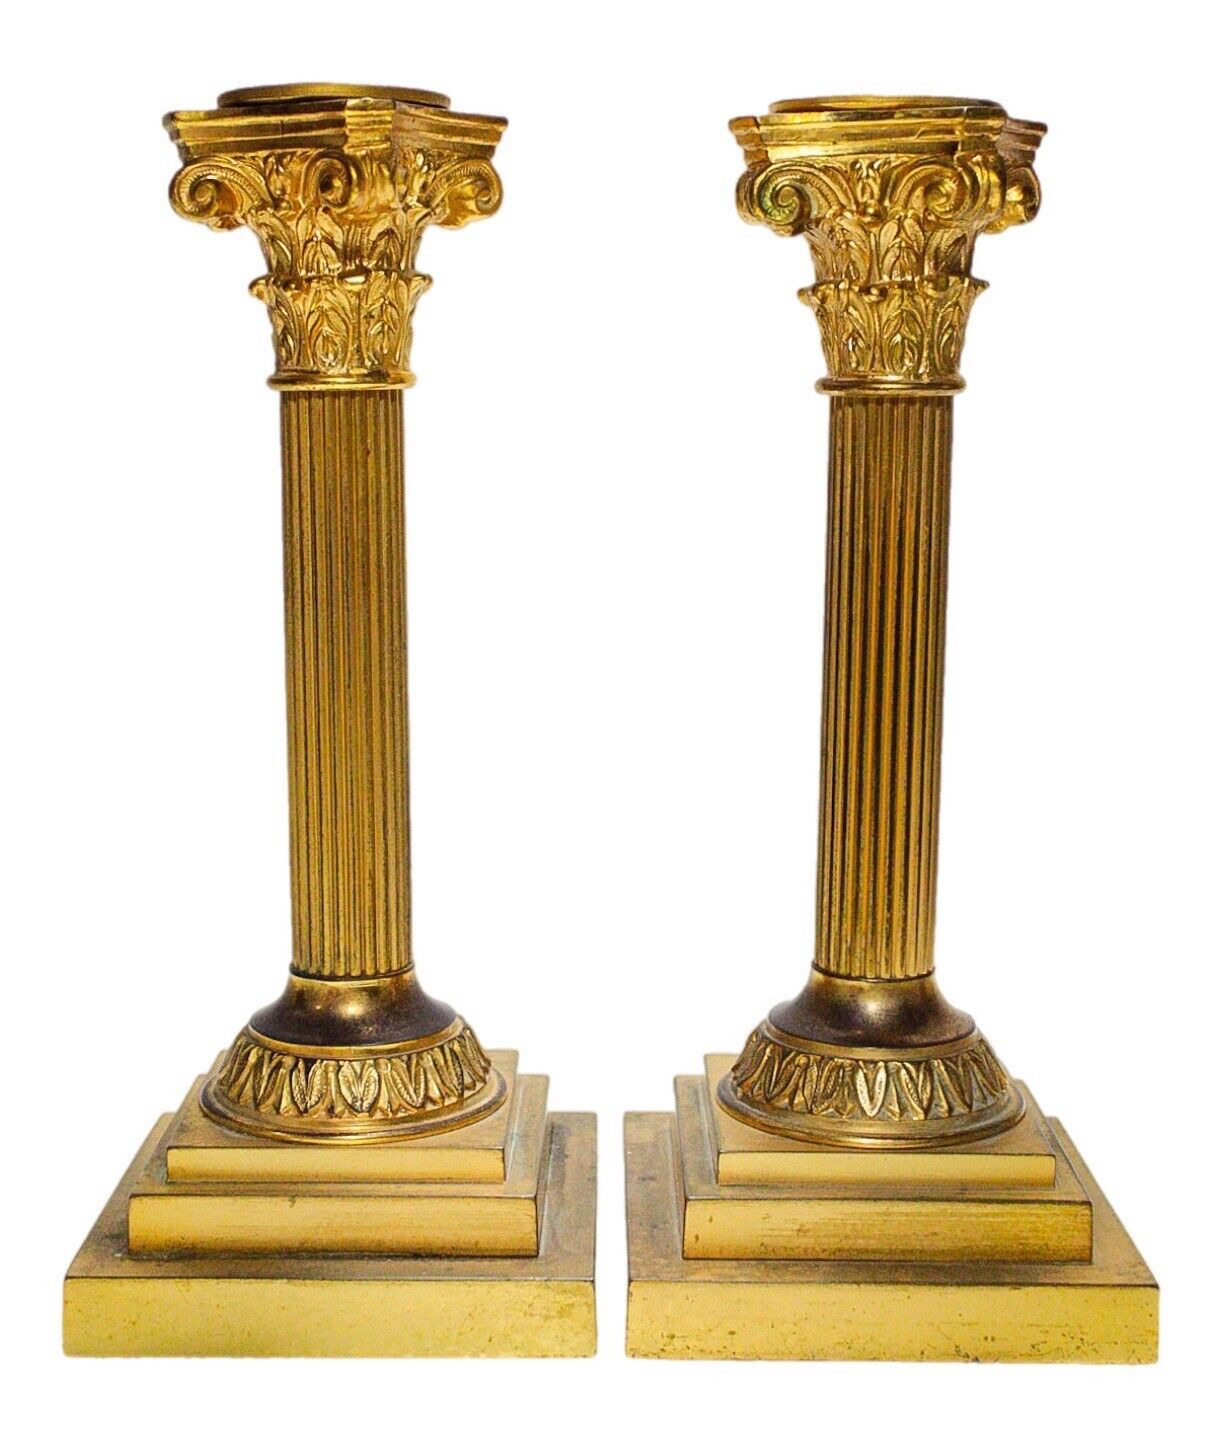 Antique Dore Bronze Empire Neoclassical Pair Of Candlesticks Candle Holders